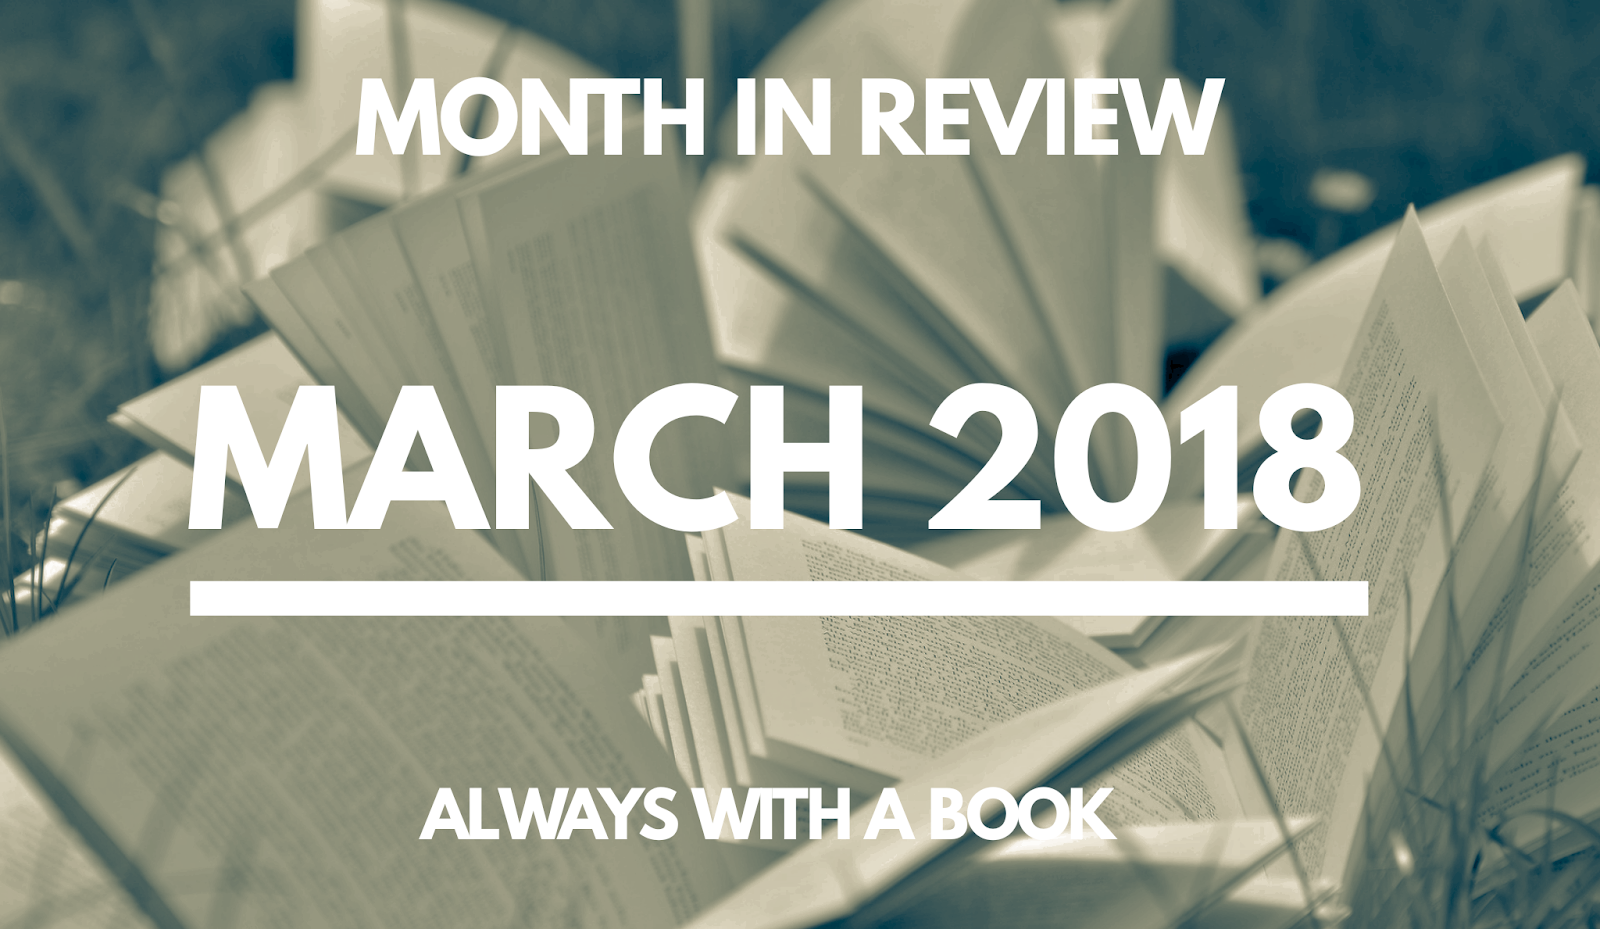 Month in Review: March 2018